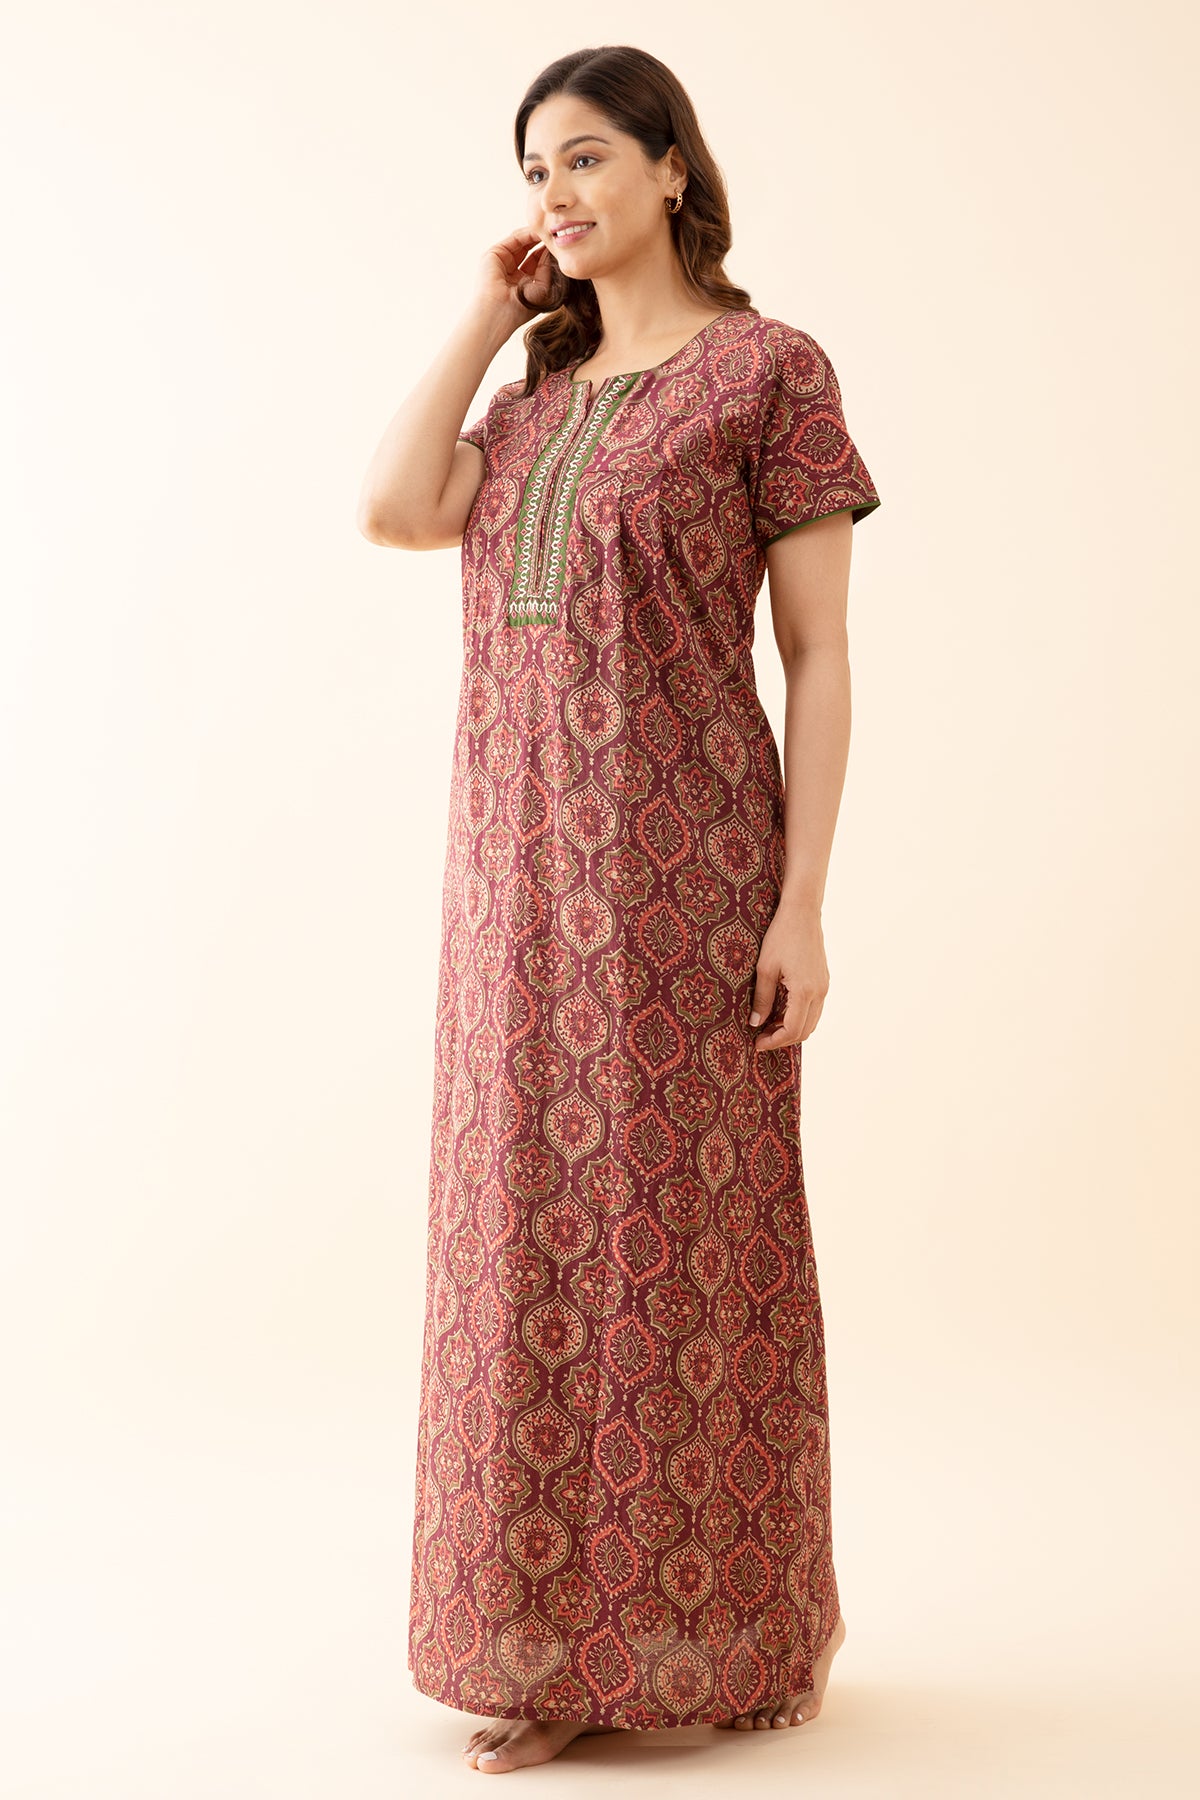 Floral Printed Nighty with Contrast Embroidered Yoke Maroon